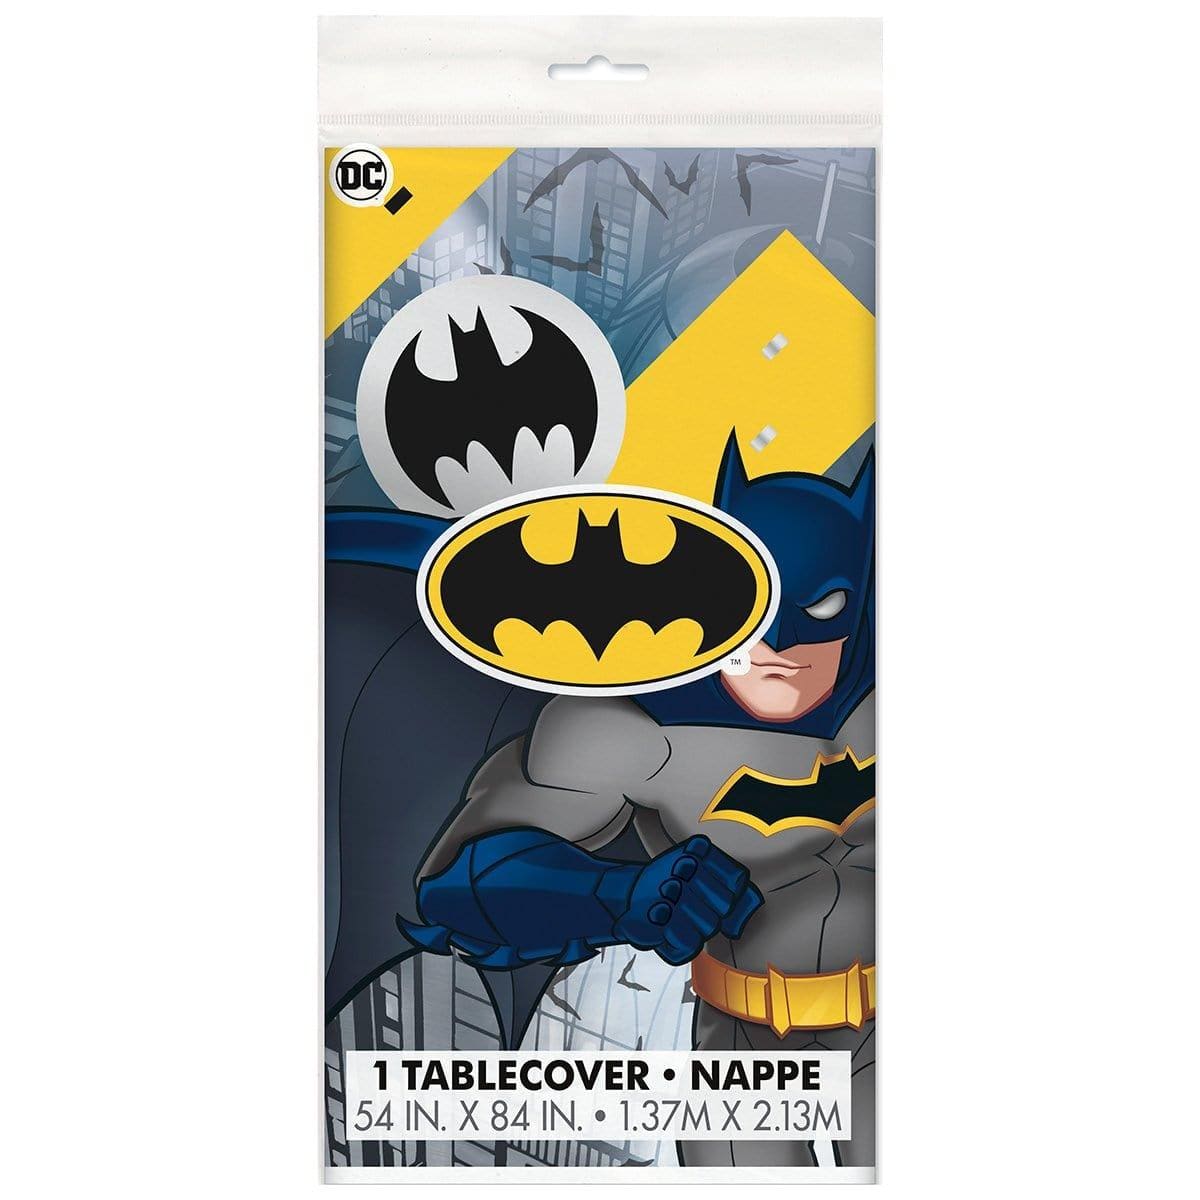 Buy Kids Birthday Batman Tablecover sold at Party Expert